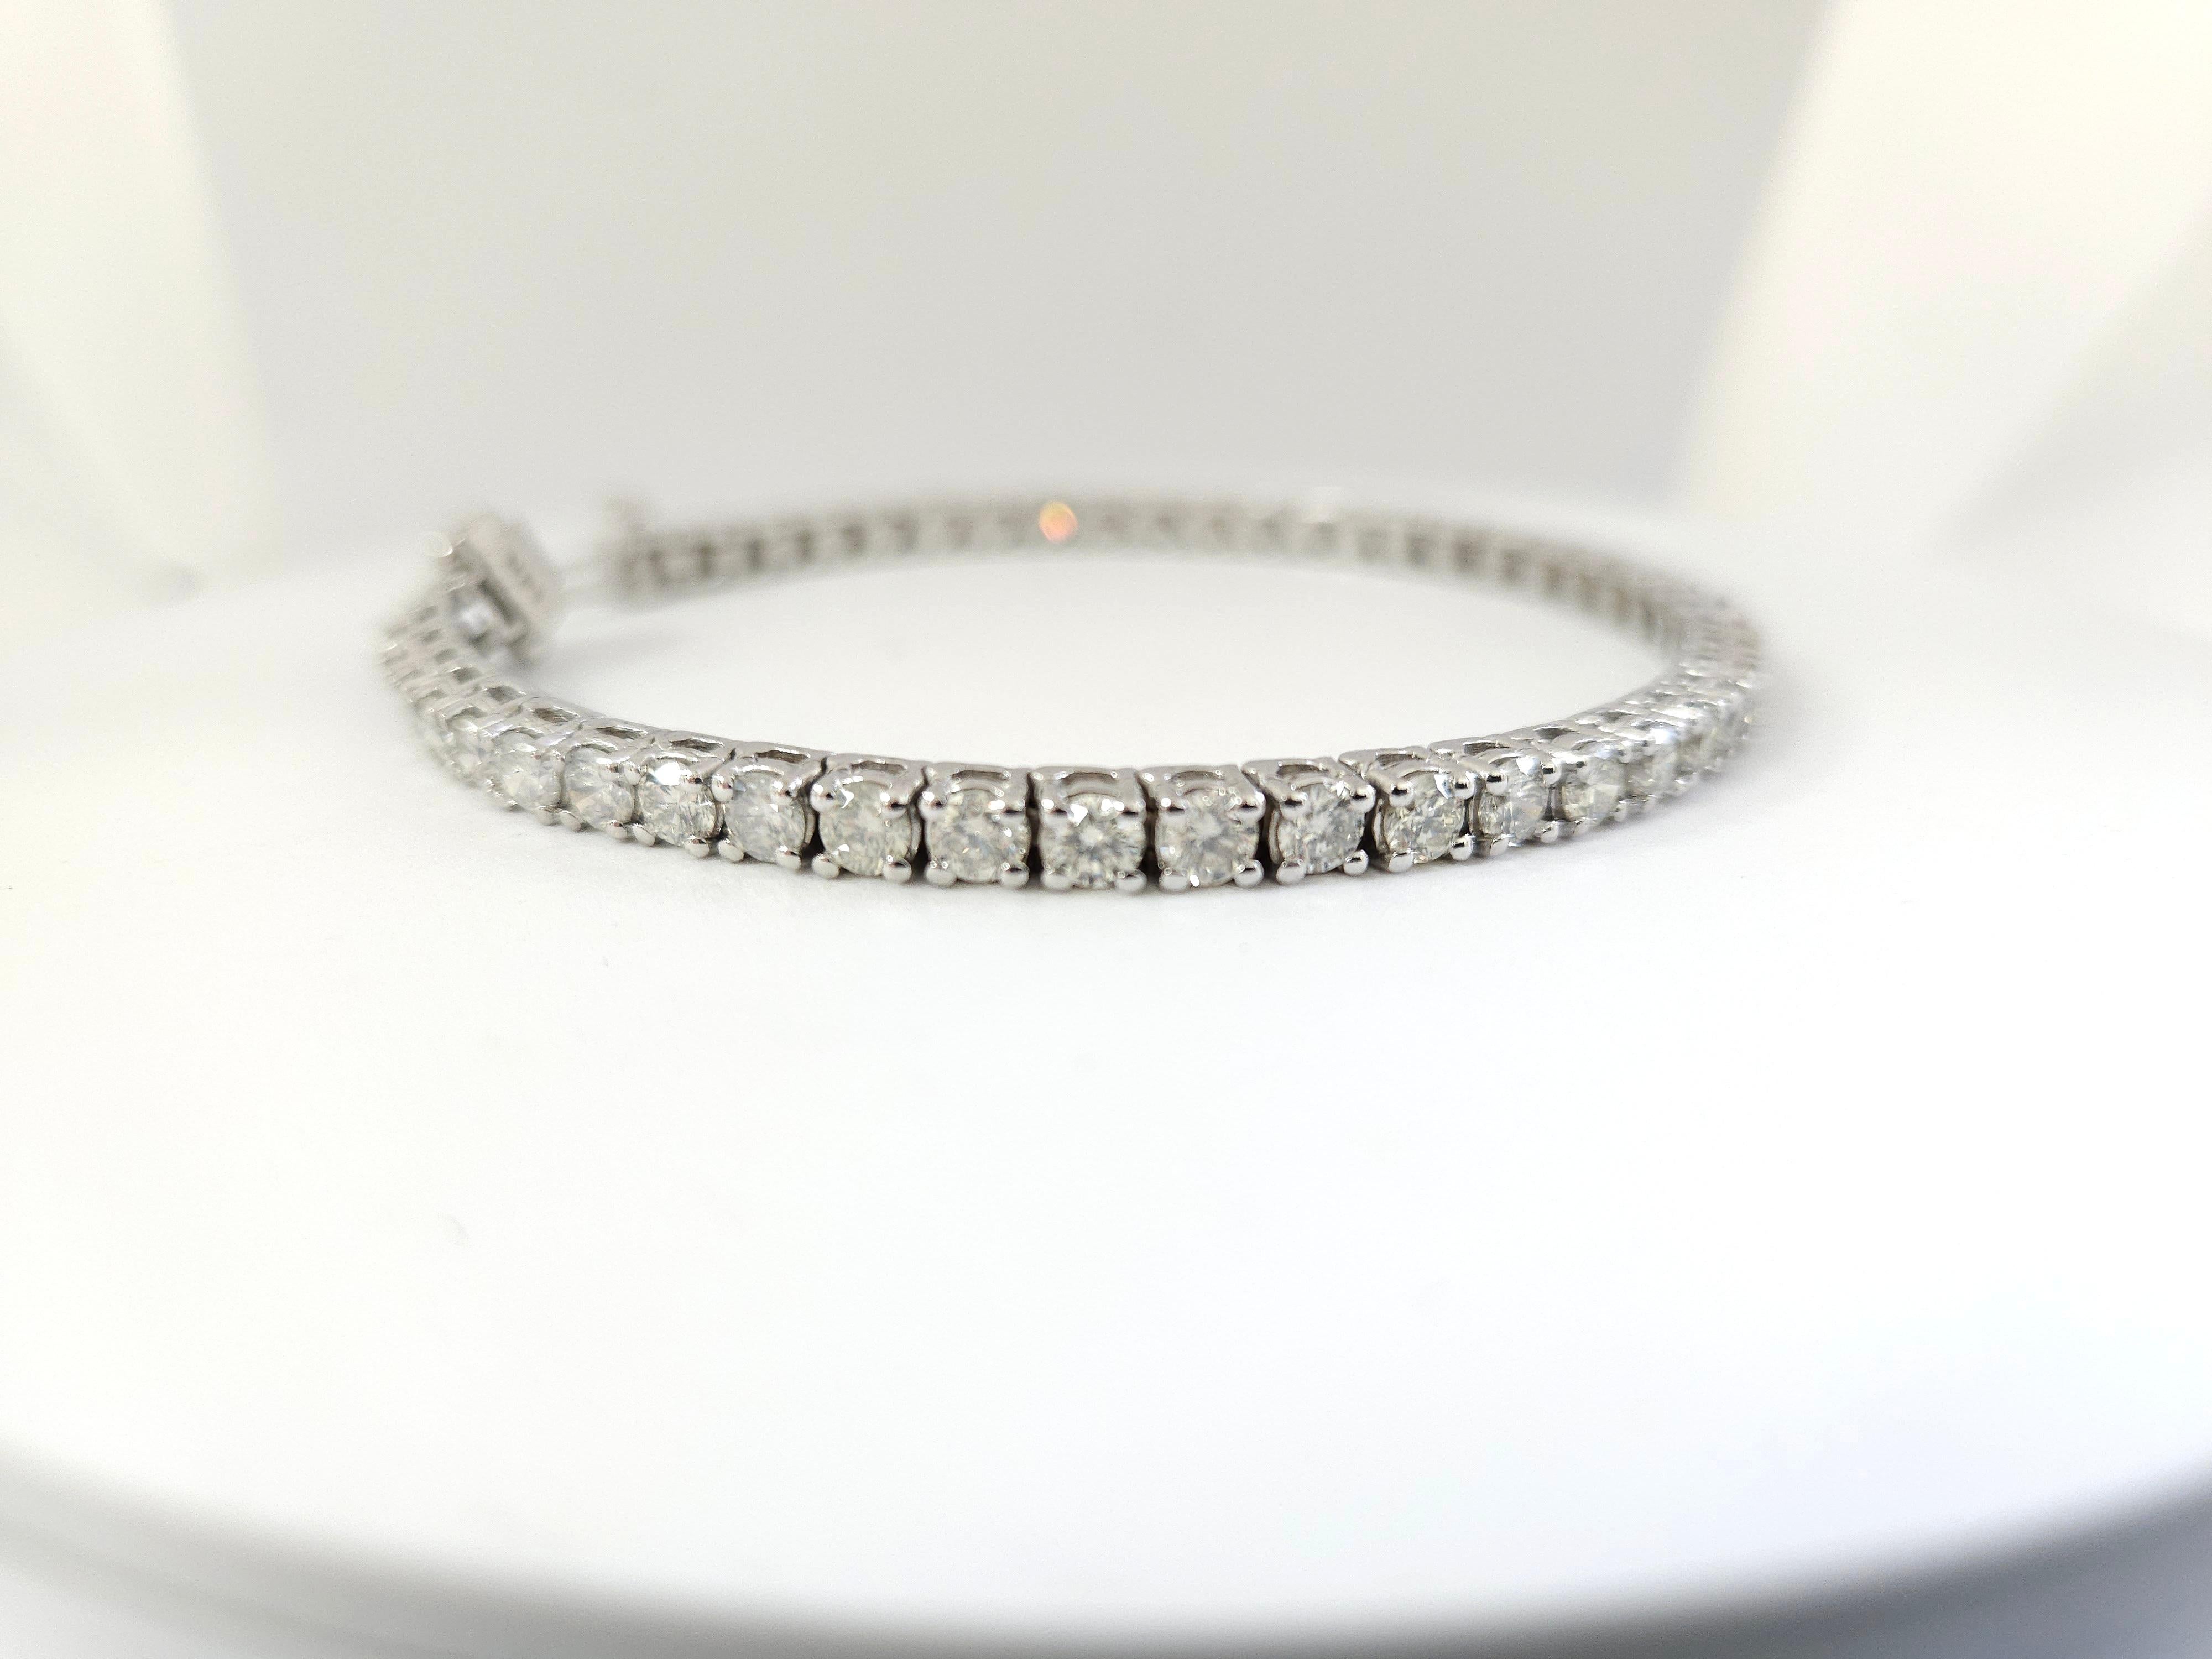 Natural diamonds tennis bracelet round-brilliant cut  14k white gold. 
7 inch. Average Color I, Clarity SI 3.70 mm wide,48 pcs, 14.06 grams very shiny don't miss.

*Free shipping within U.S*

